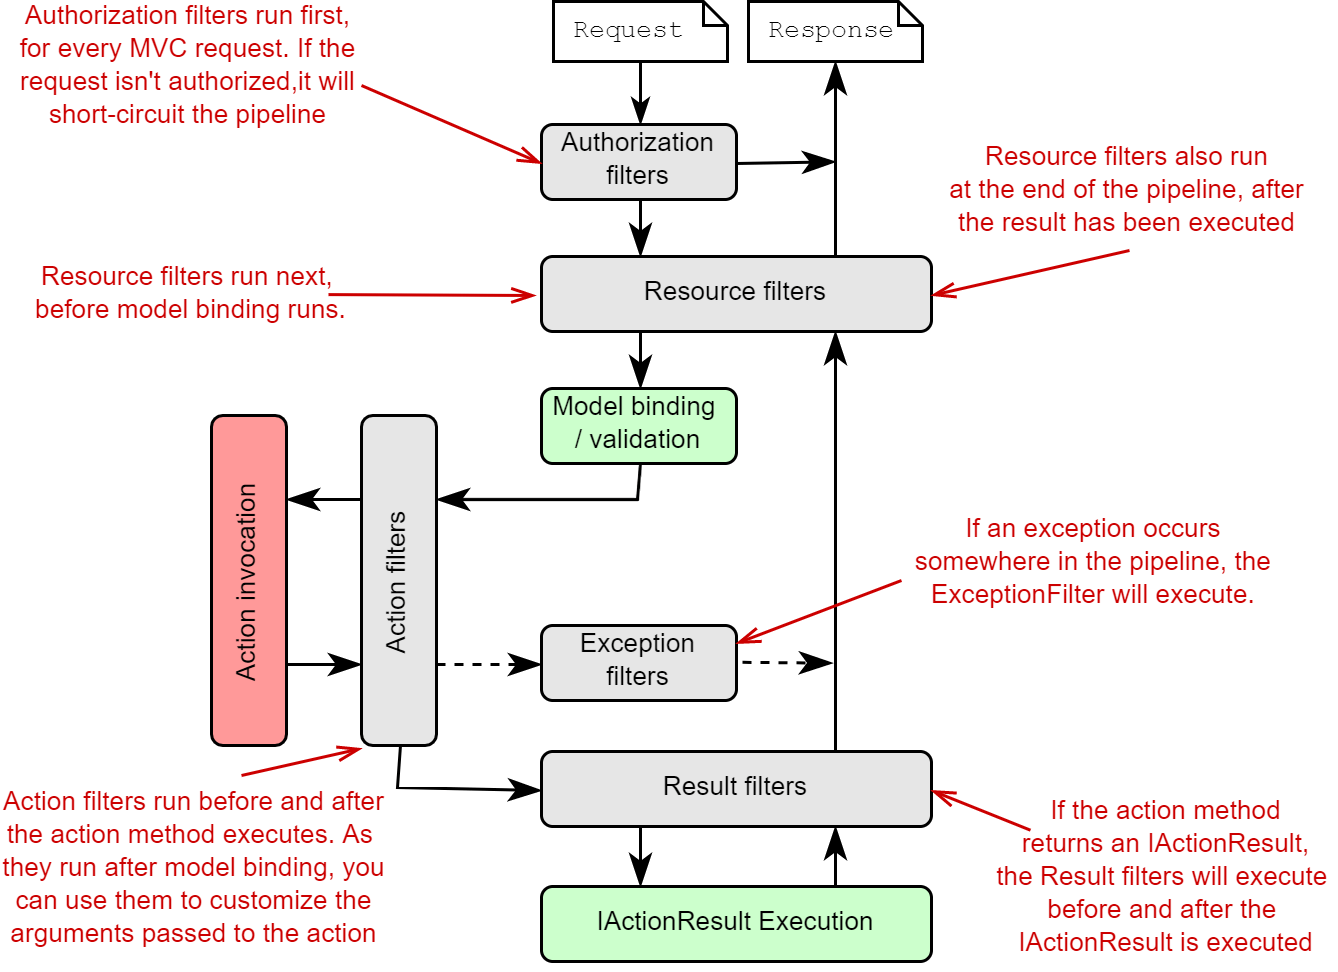 Figure 2 The MVC filter pipeline, including the five different filters stages